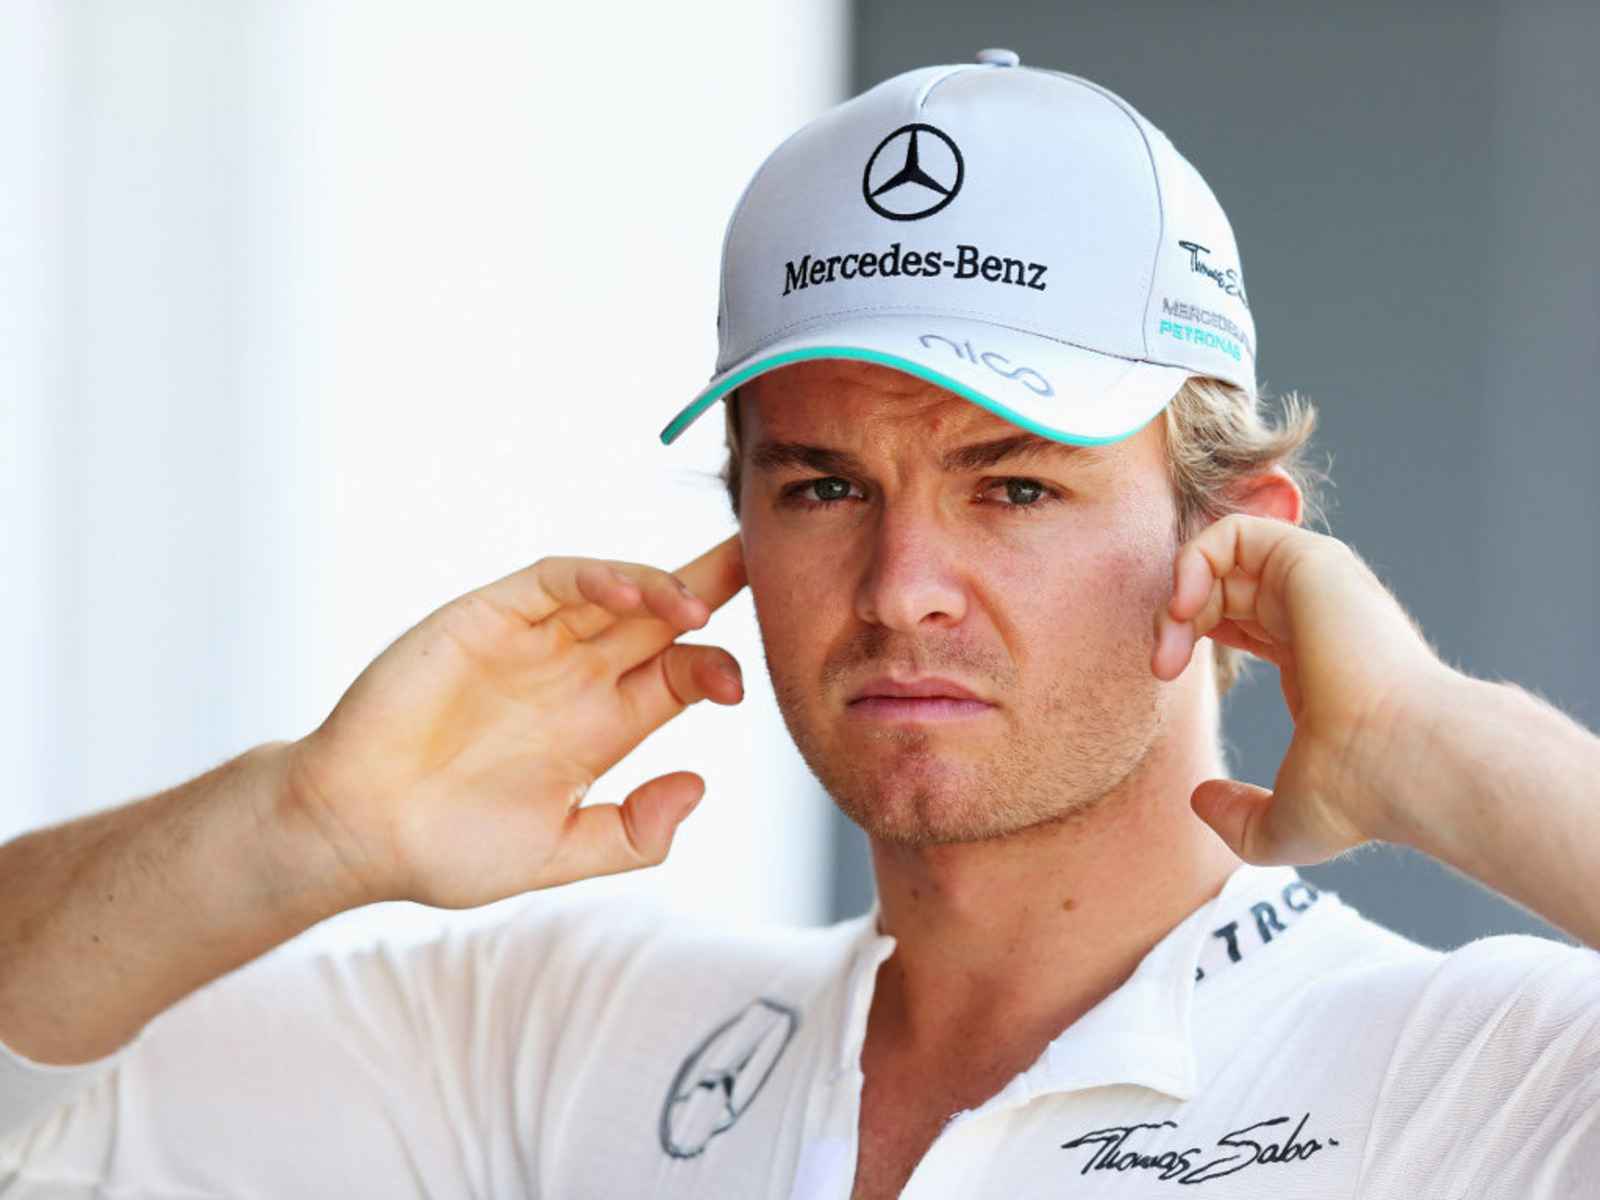 10-surprising-facts-about-nico-rosberg